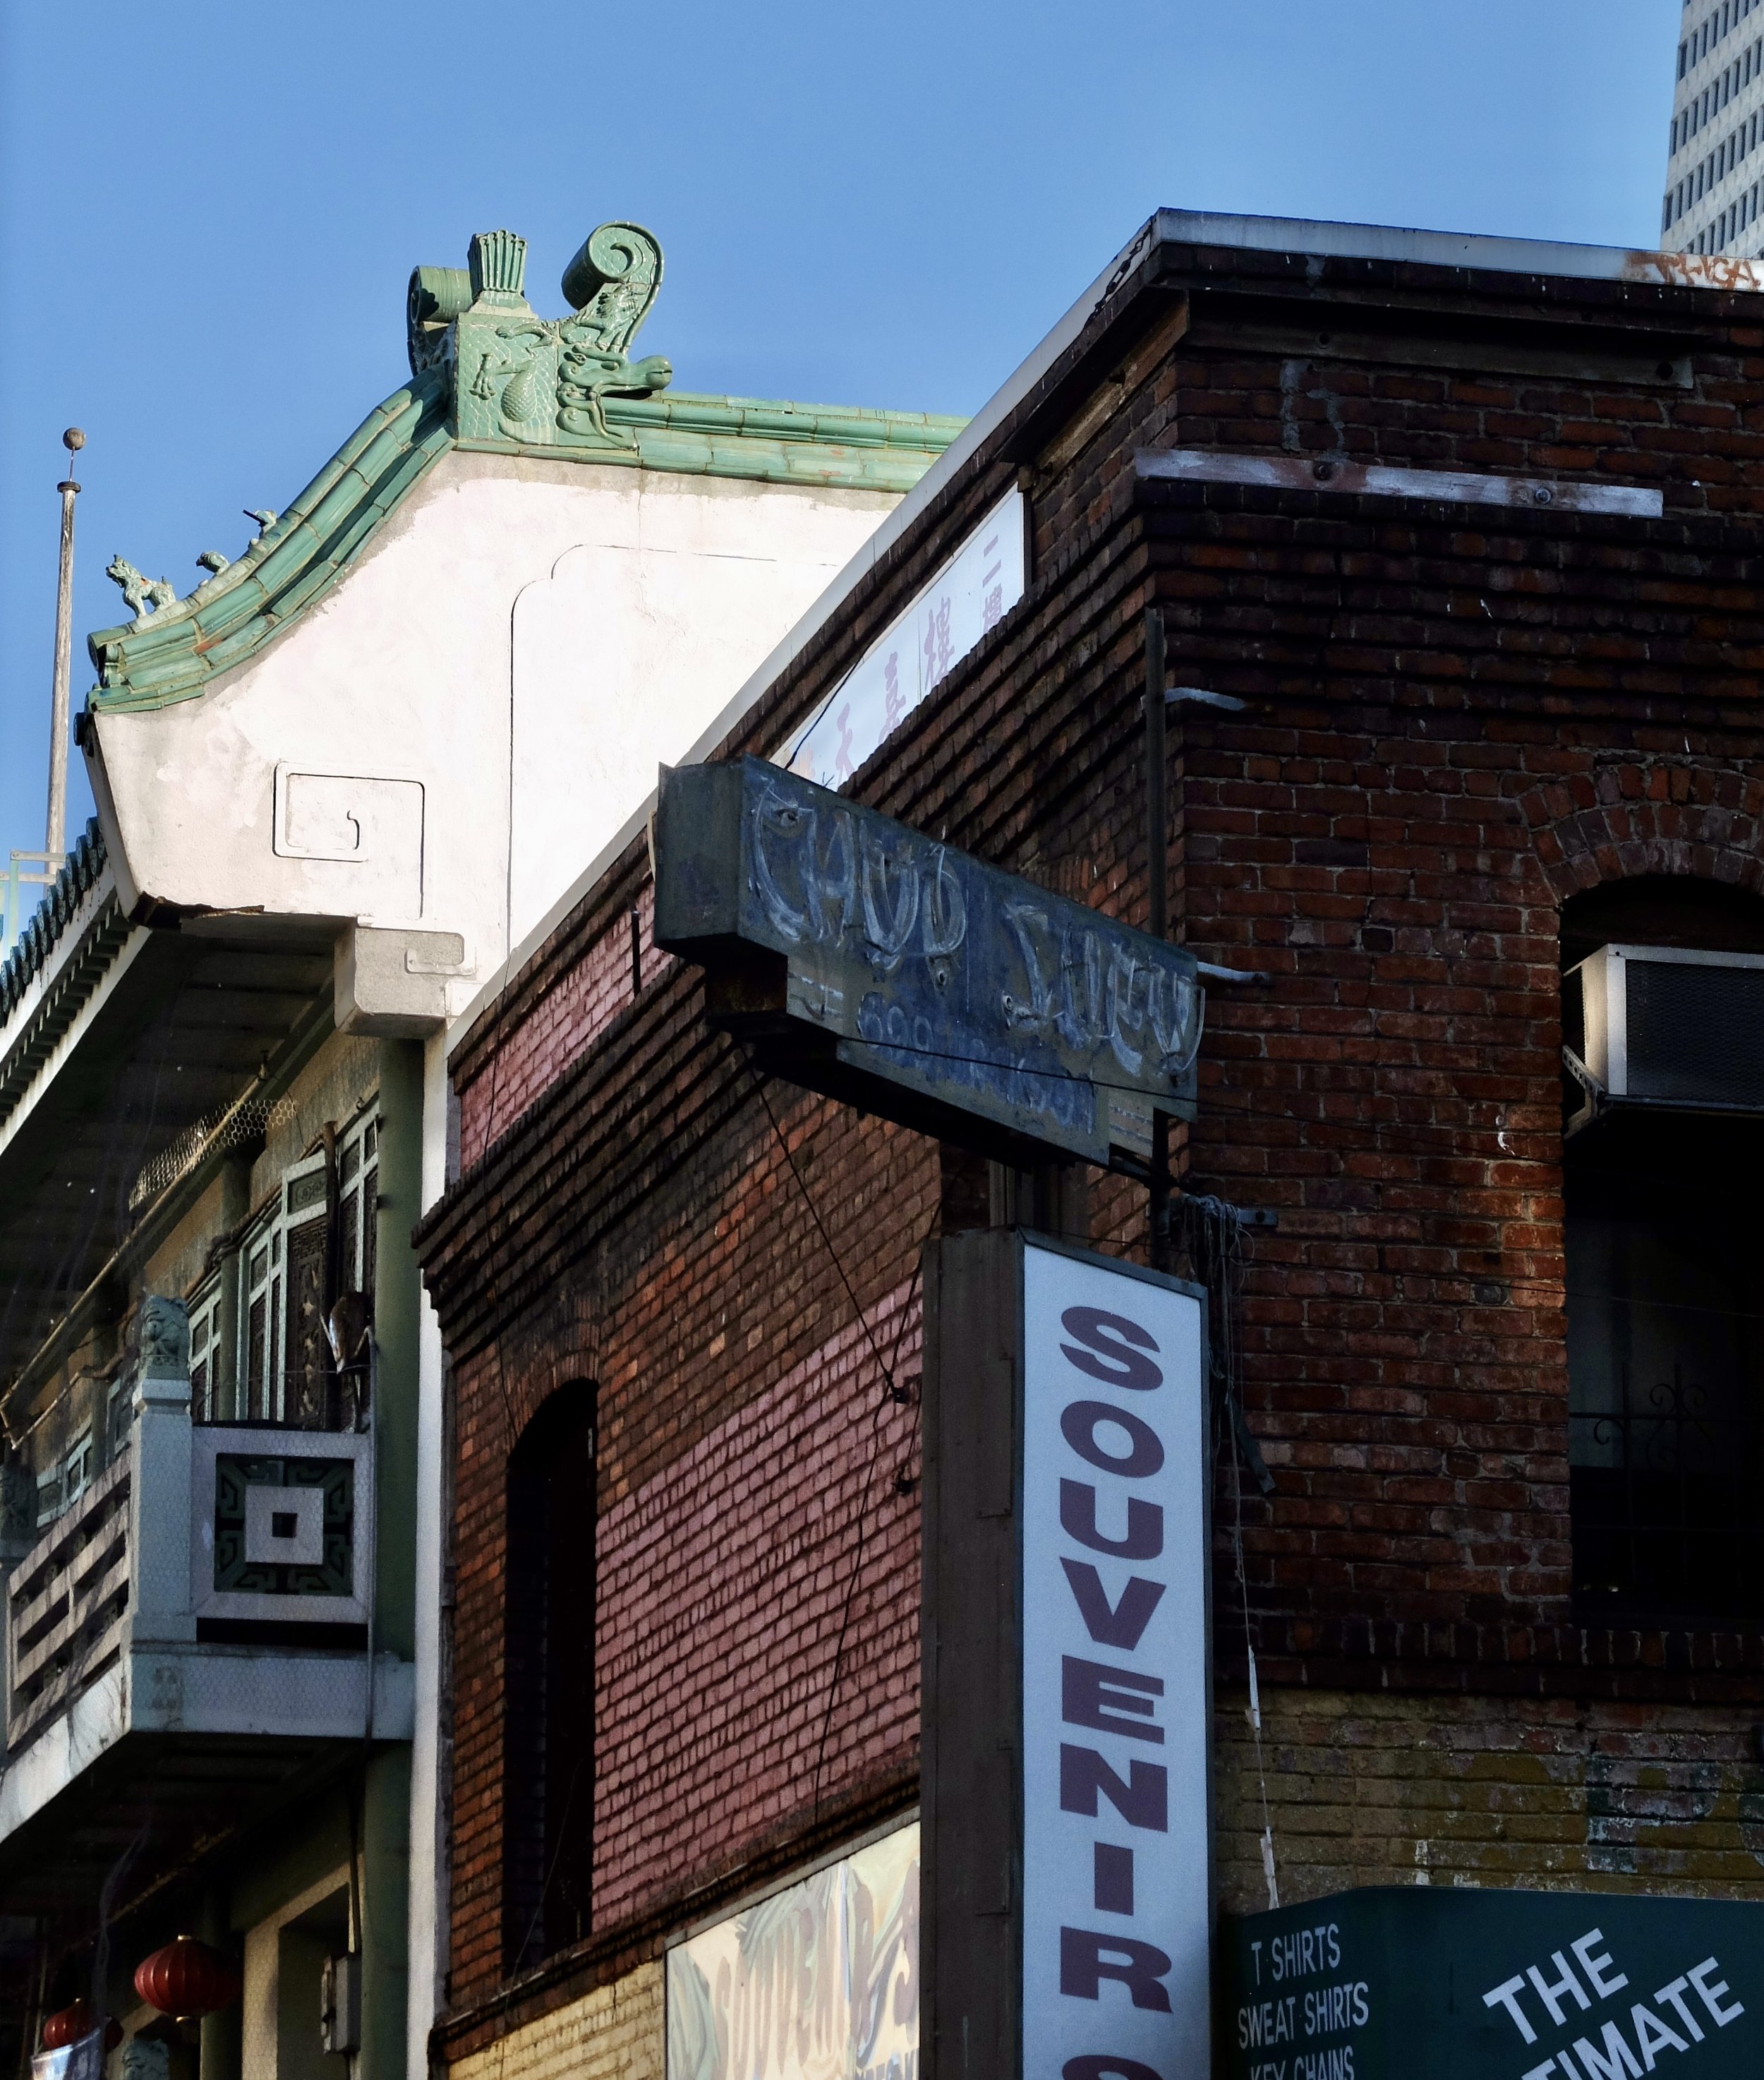 At one time "Chop Suey" neon signs were ubiquitous around Chinatowns.  This non-functional sign is one of the few remaining here.  